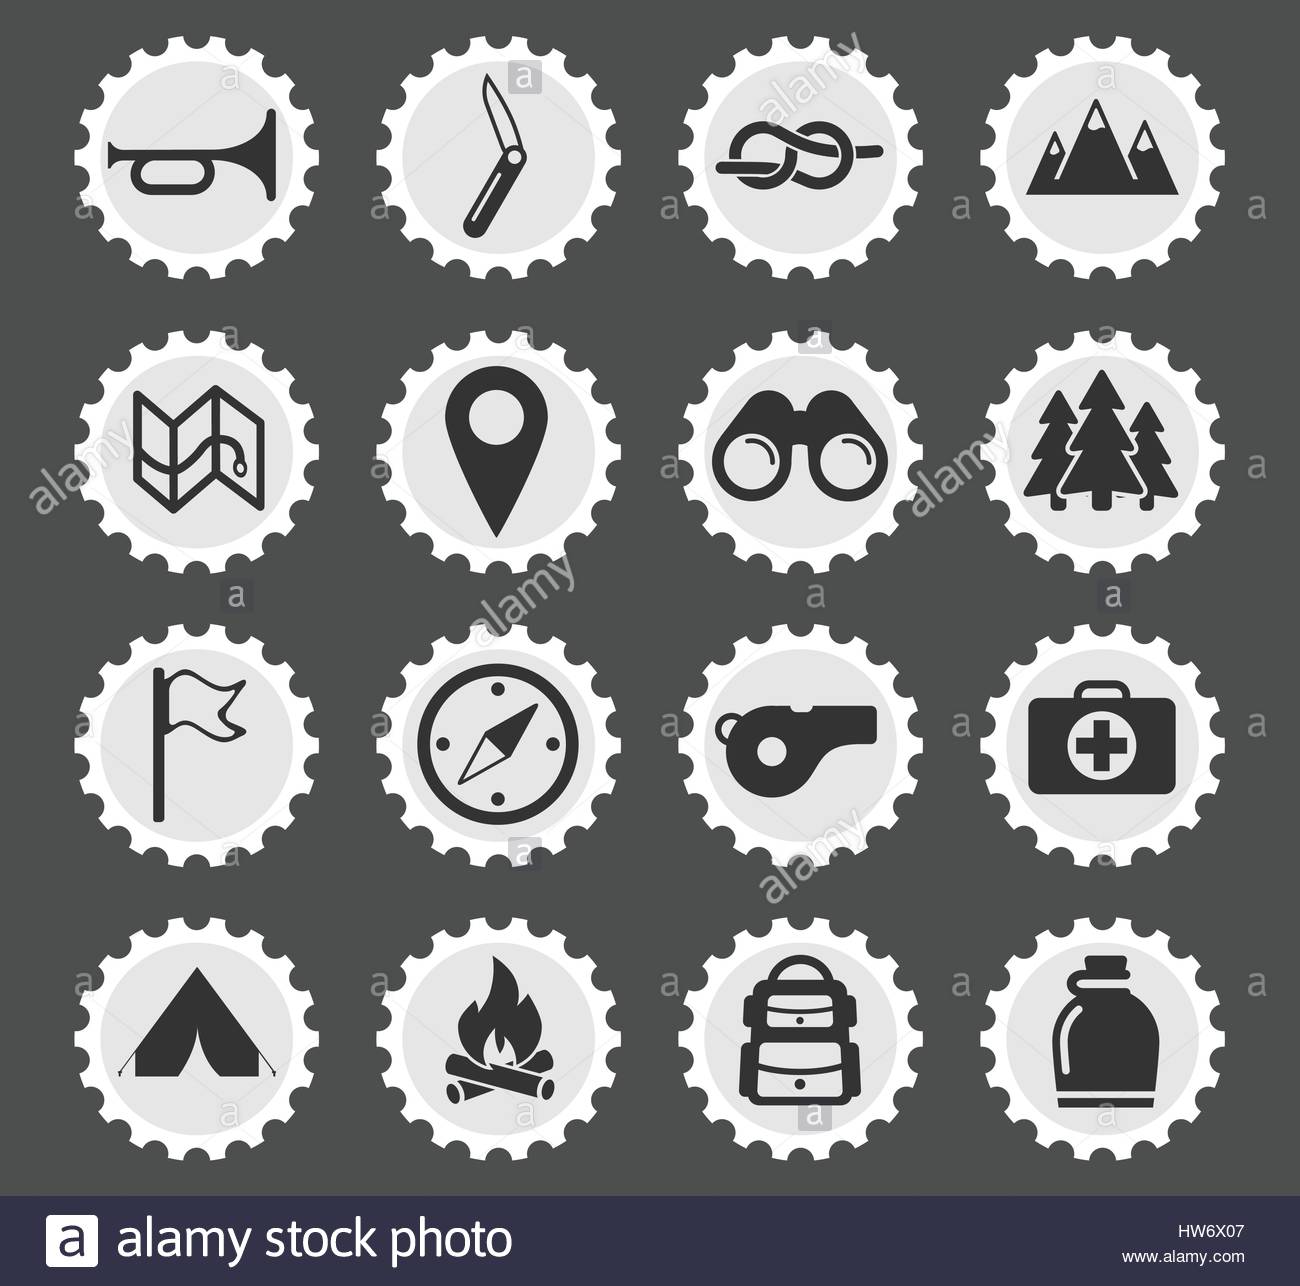 Boy Scout Icon Set - Download Free Vector Art, Stock Graphics  Images